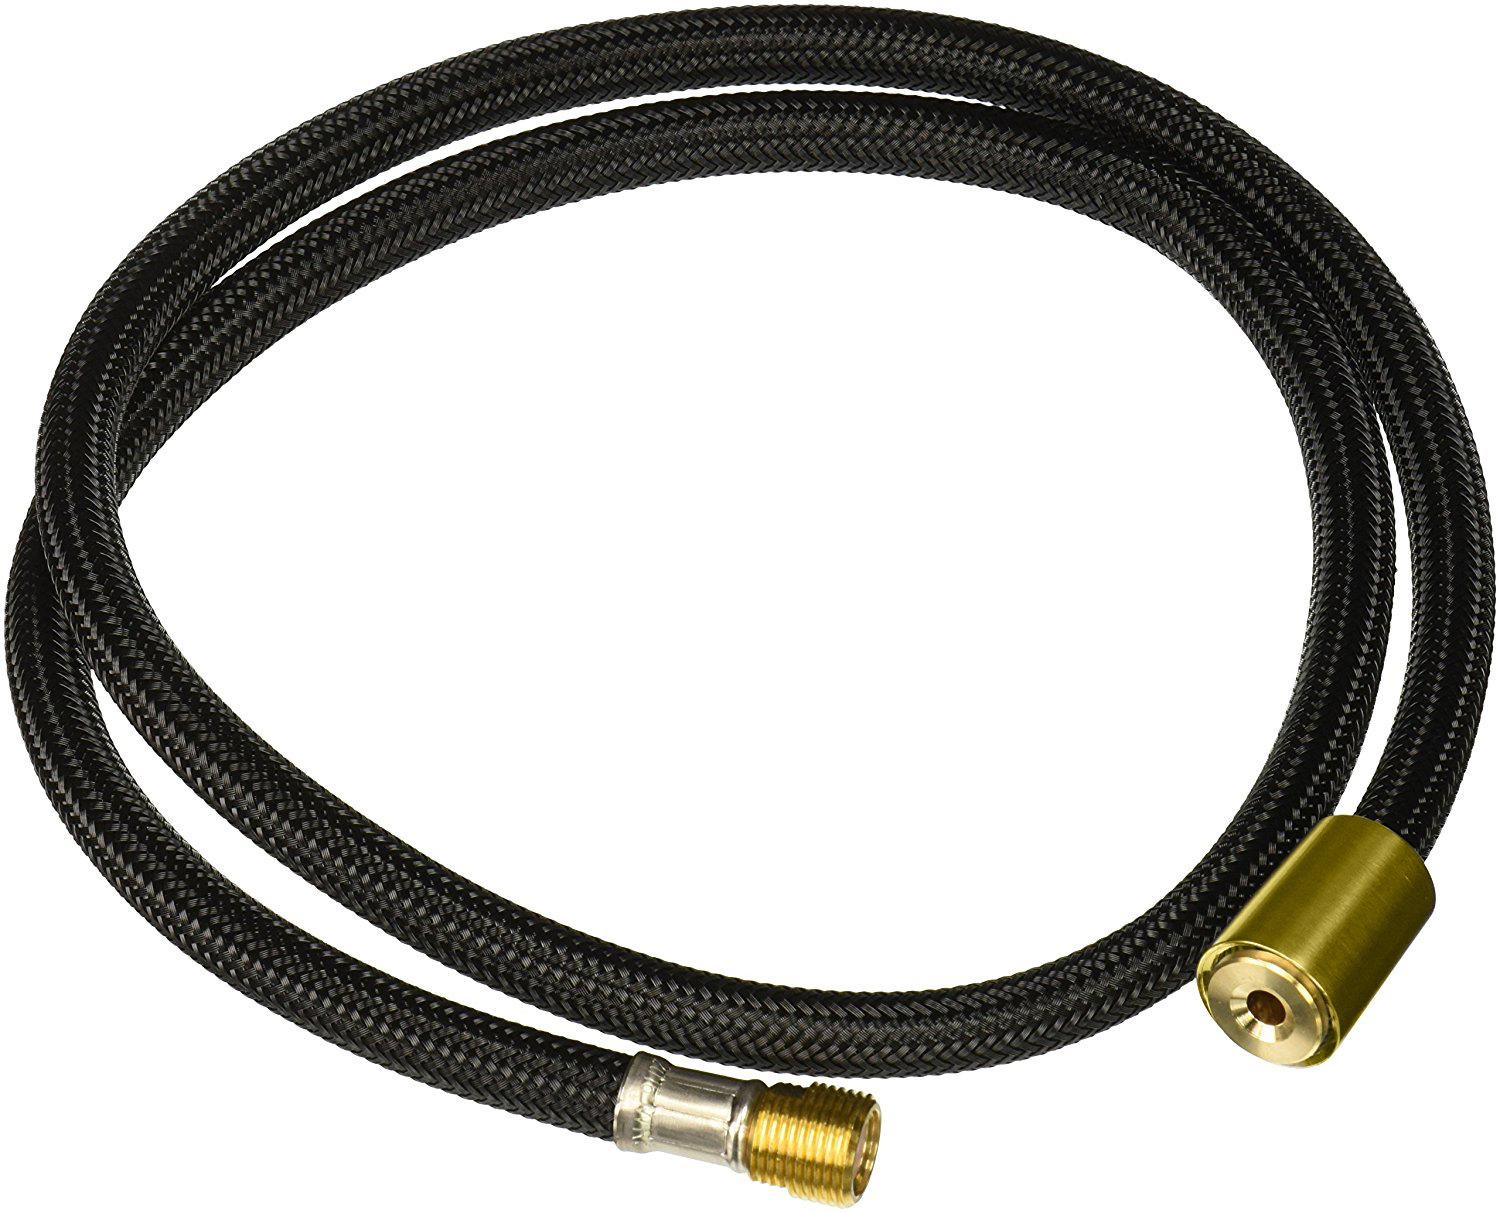 Perrin & Rowe 47" Rinse Hose Black Nylon for Sidespray Kitchen Faucets English Bronze